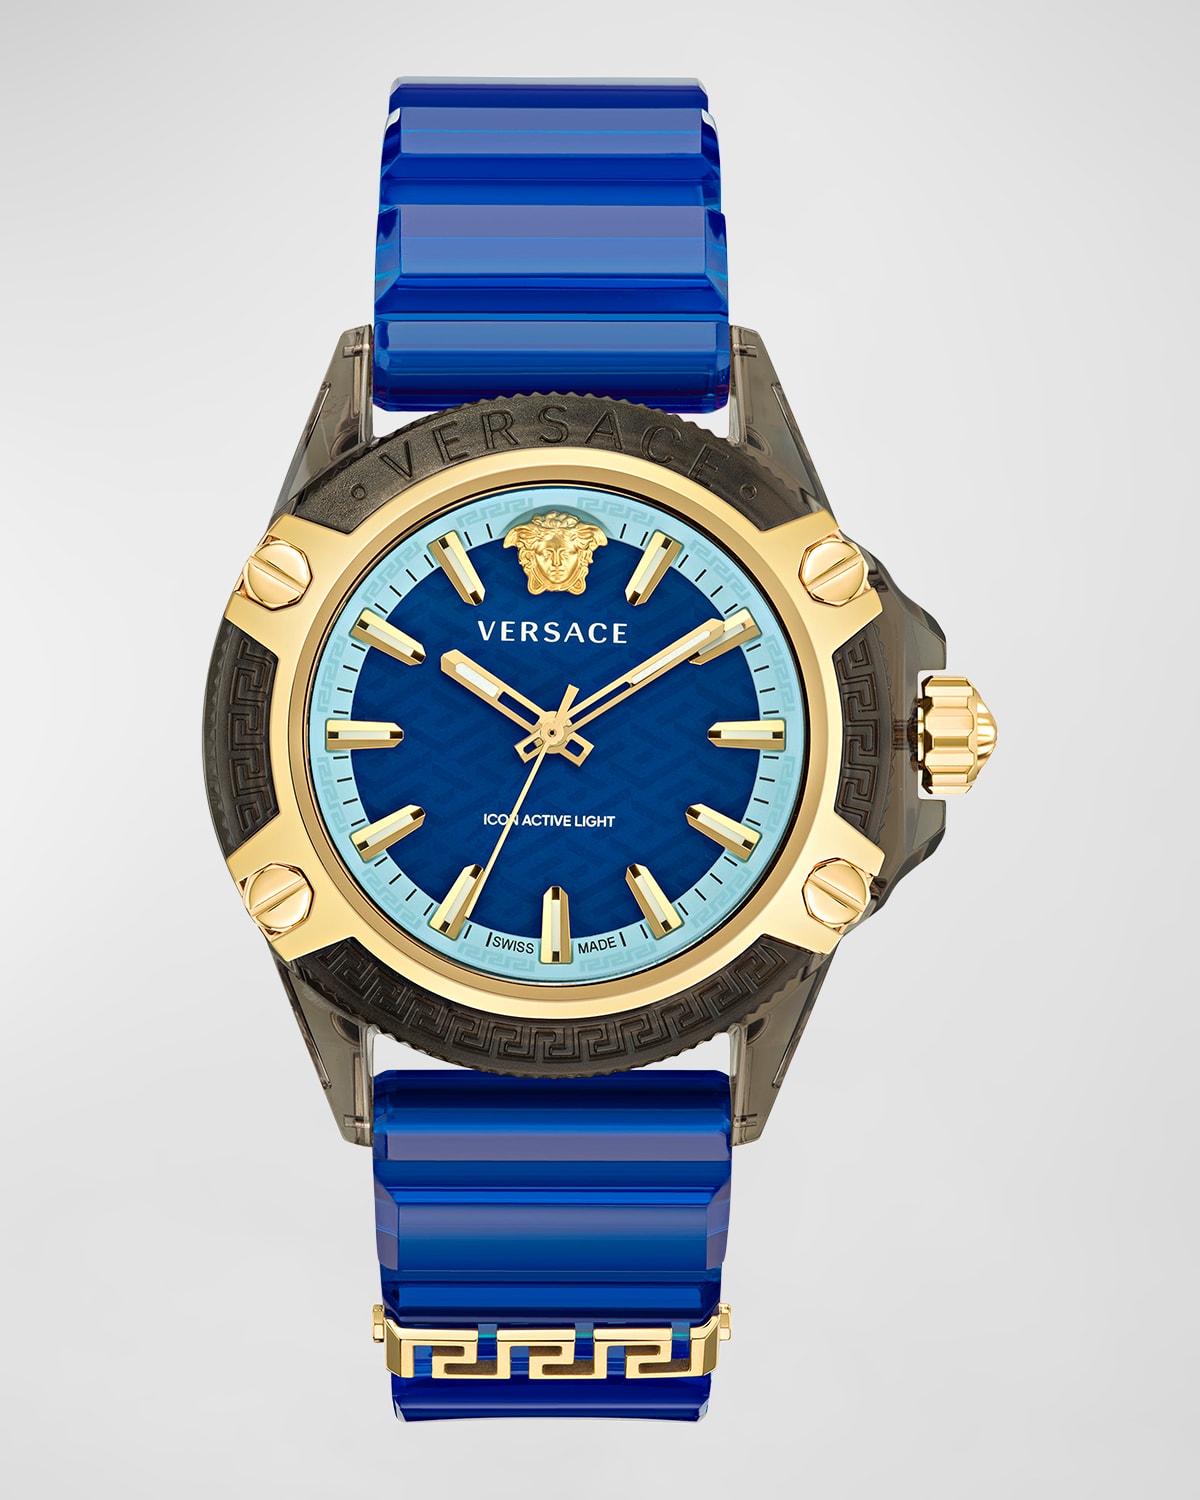 Versace Men's Icon Active Light Silicone Strap Watch, 42mm In Blue